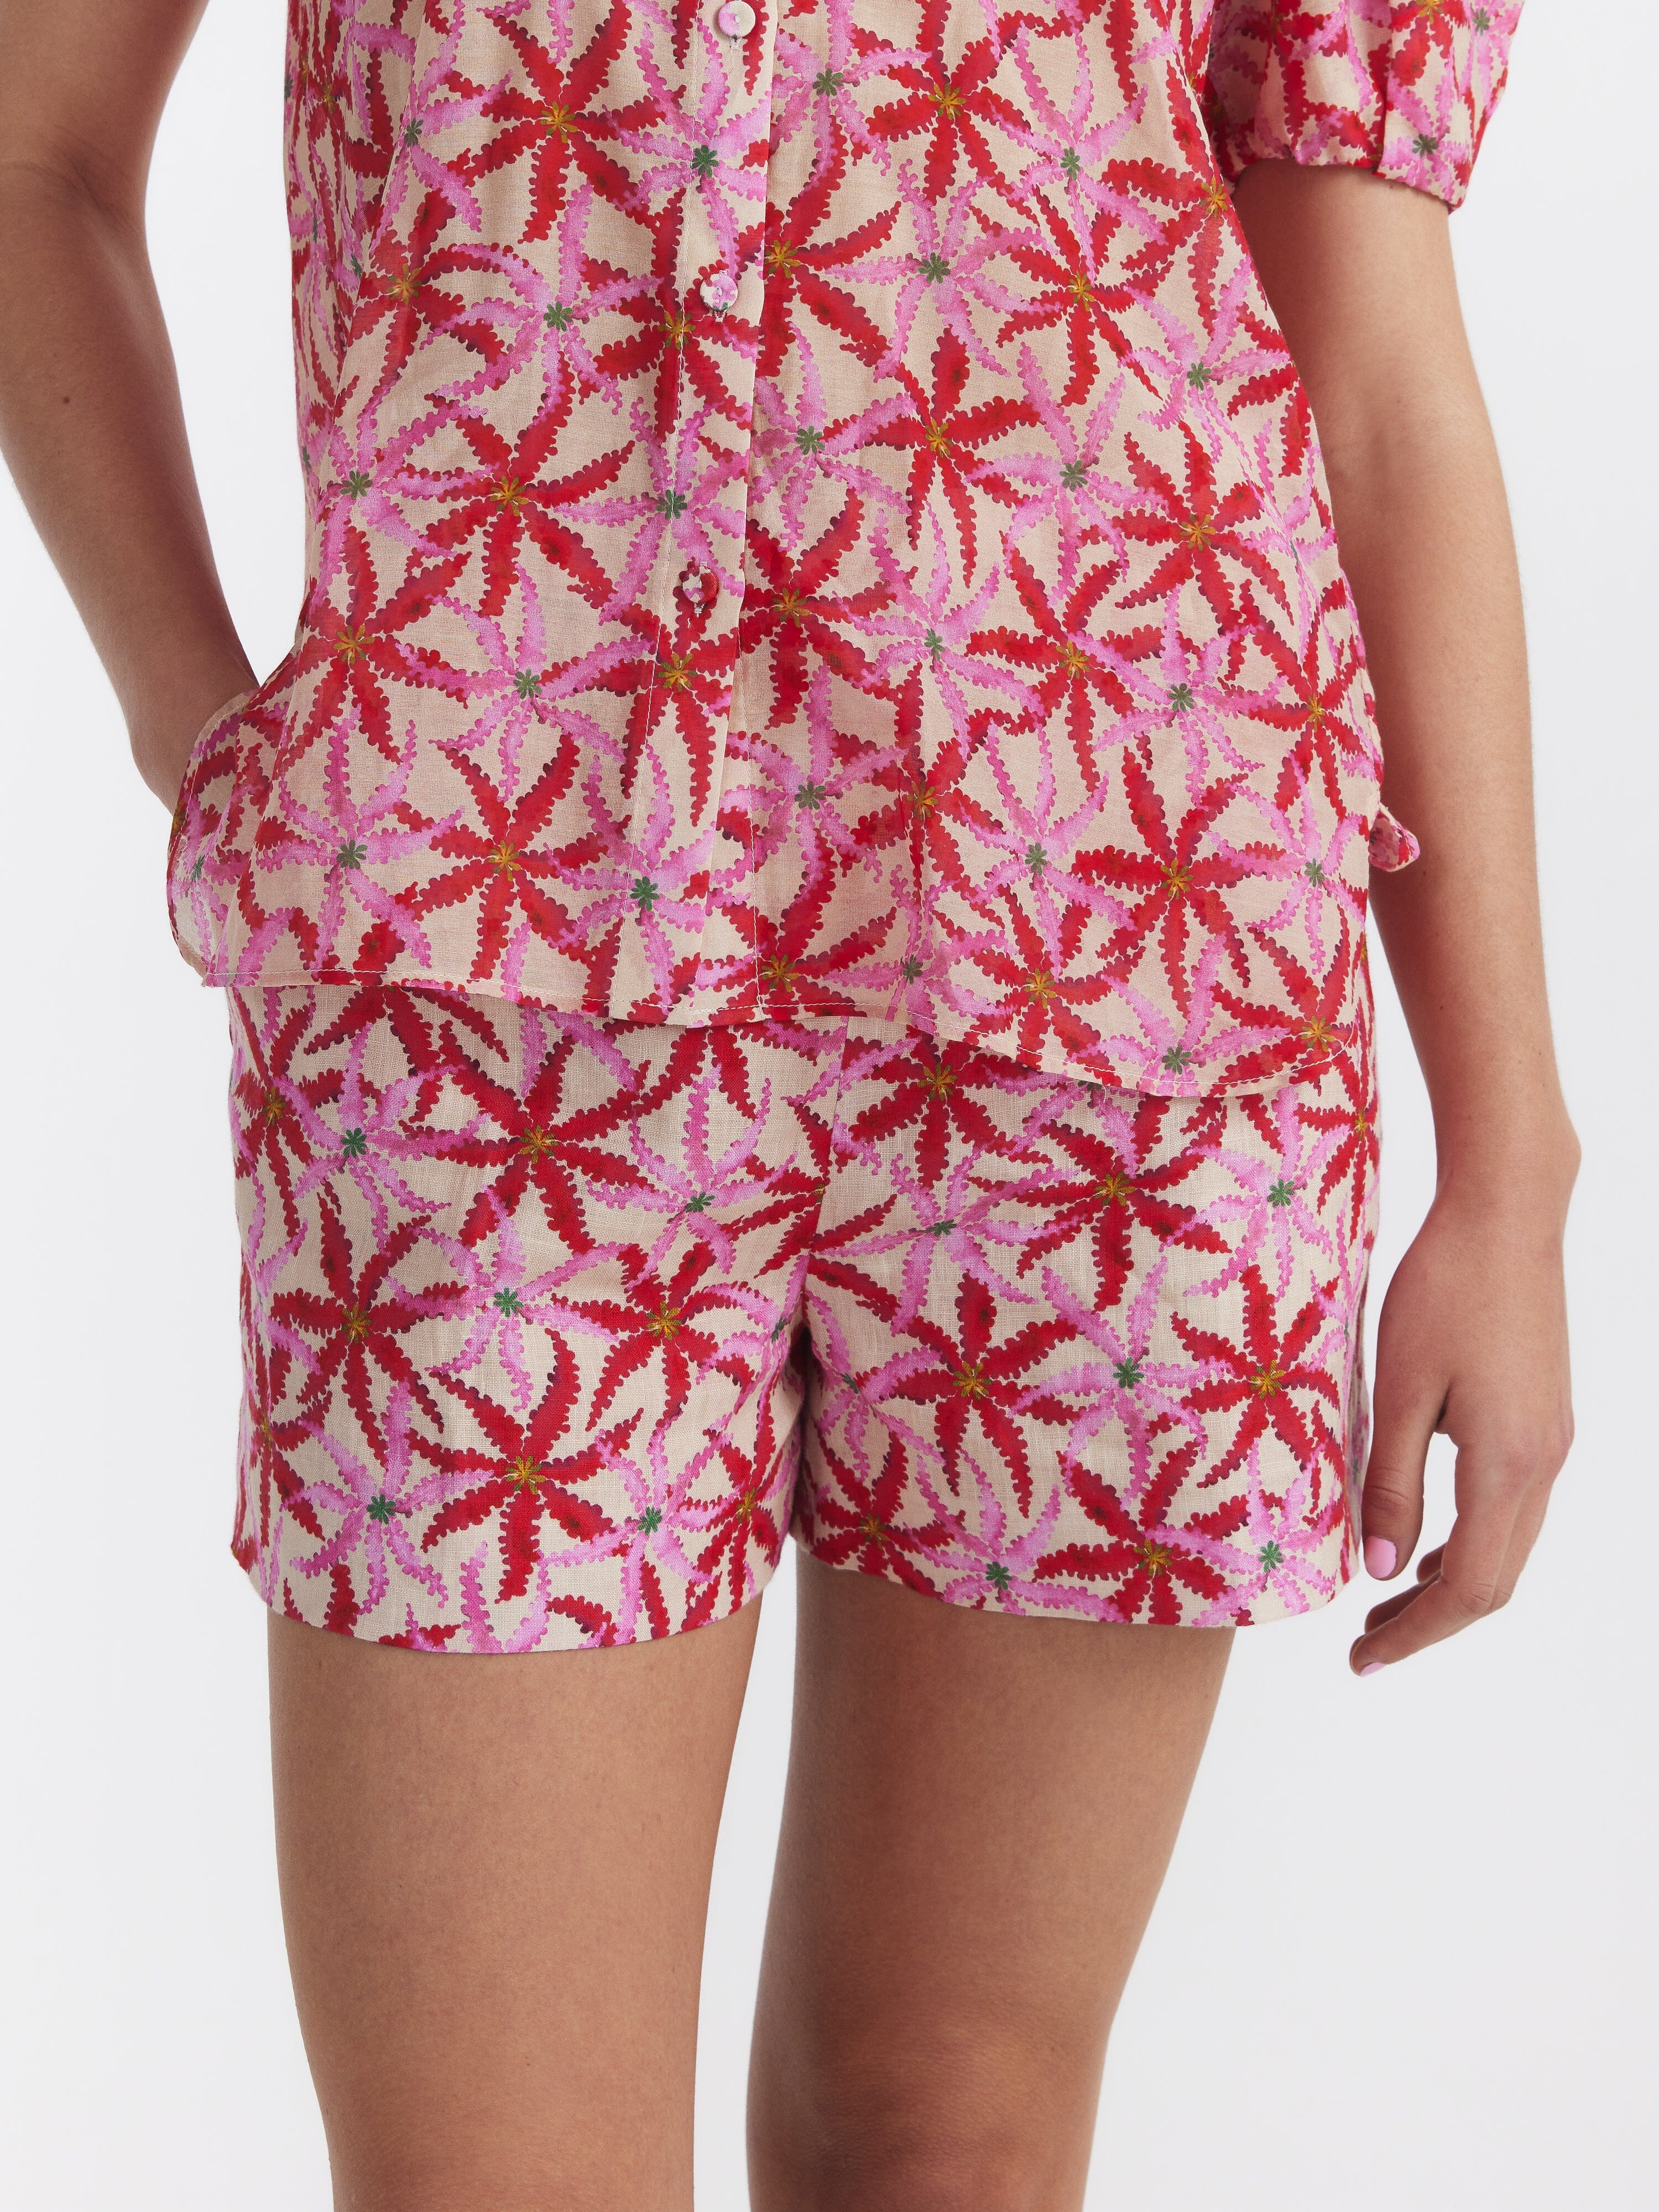 Wide Tailored Shorts in Starfish